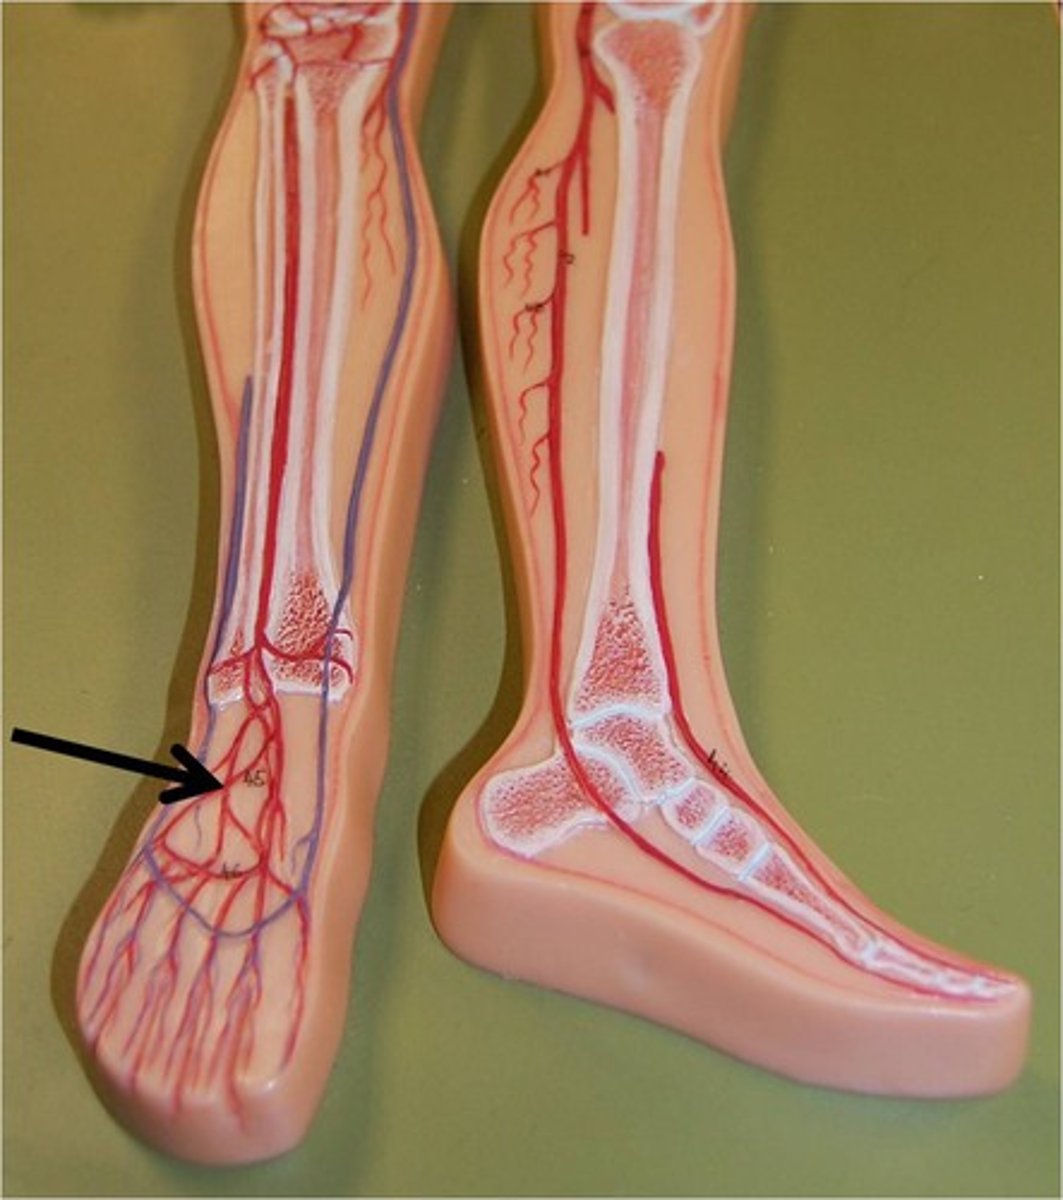 <p>the artery in the foot that can be felt on the top of the foot</p>